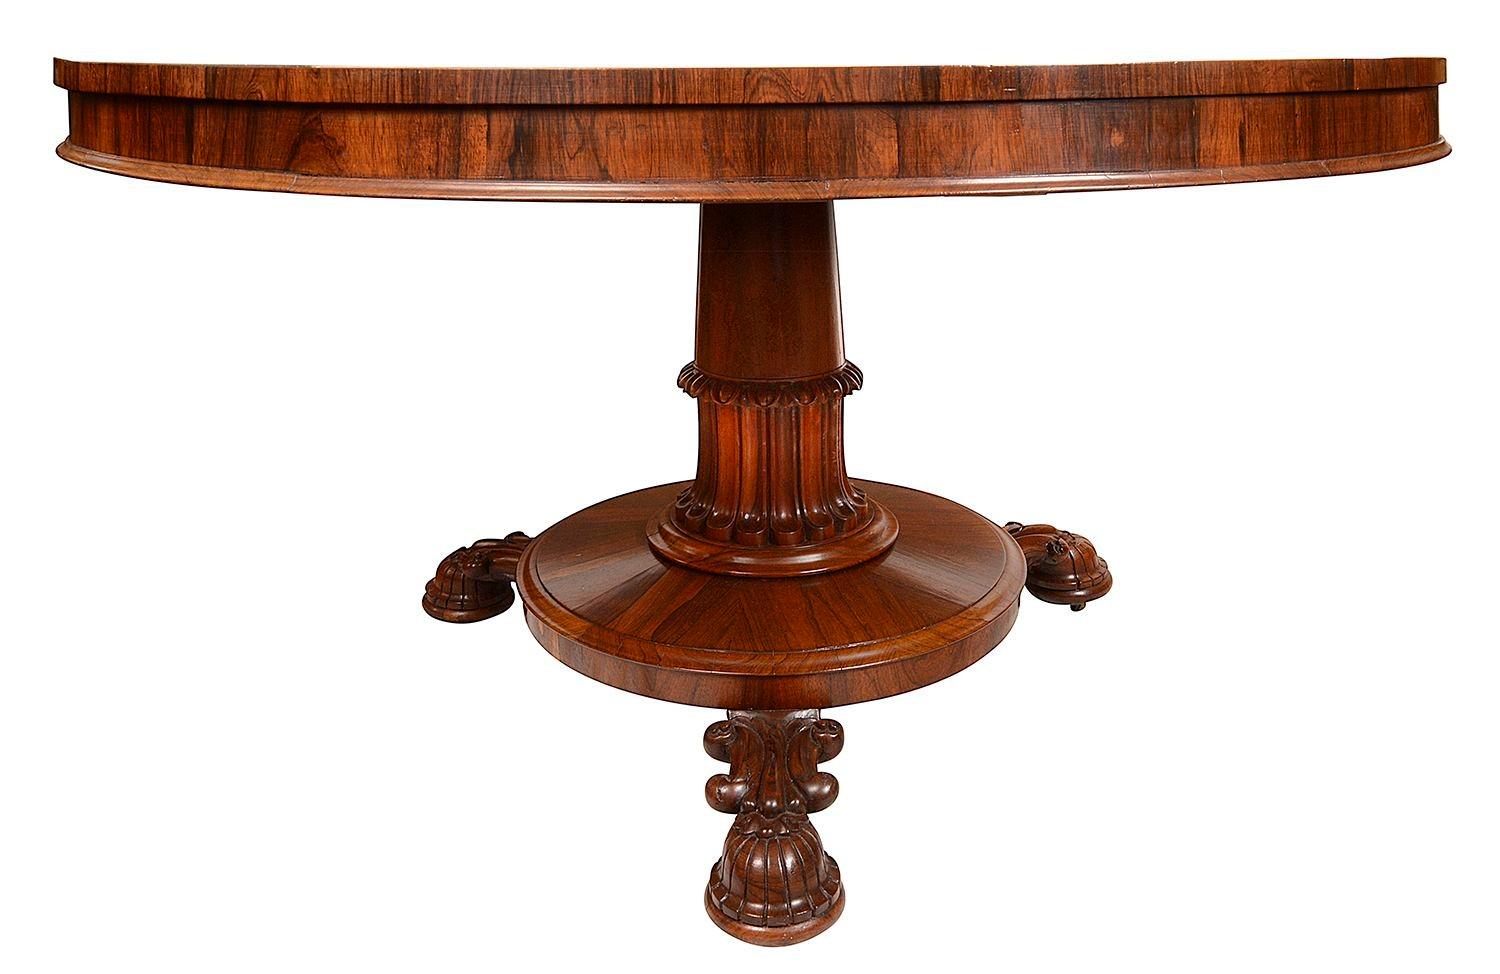 A very good quality late Regency period Rosewood circular dining / centre table. Having wonderful figured veneers to the top, raised on a circular pedestal with carved decoration, a platform terminating three carved feet, circa 1820-1840
 
Batch